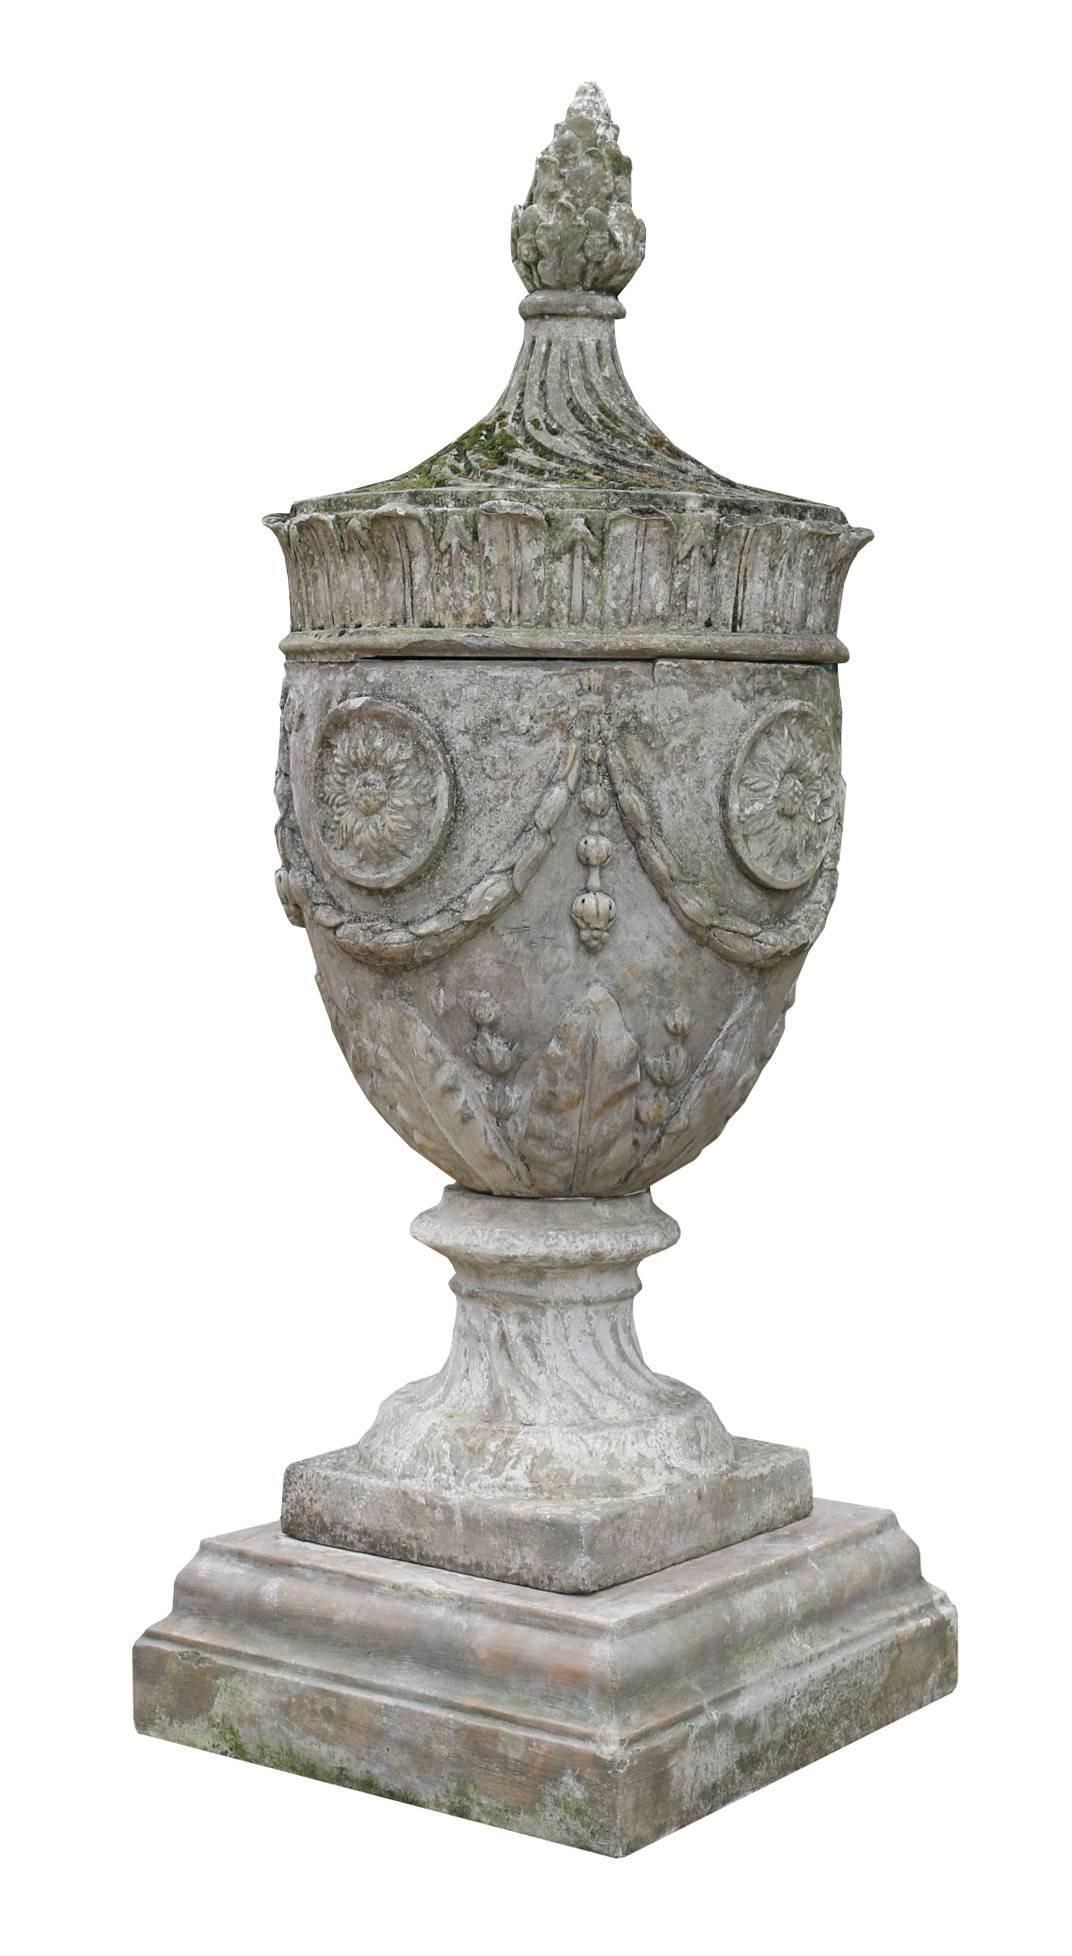 Each of the urns are three pieces, they are well weathered with some old repairs.
A copy of the late 18th century Coade design.
Weight 170 kg each.